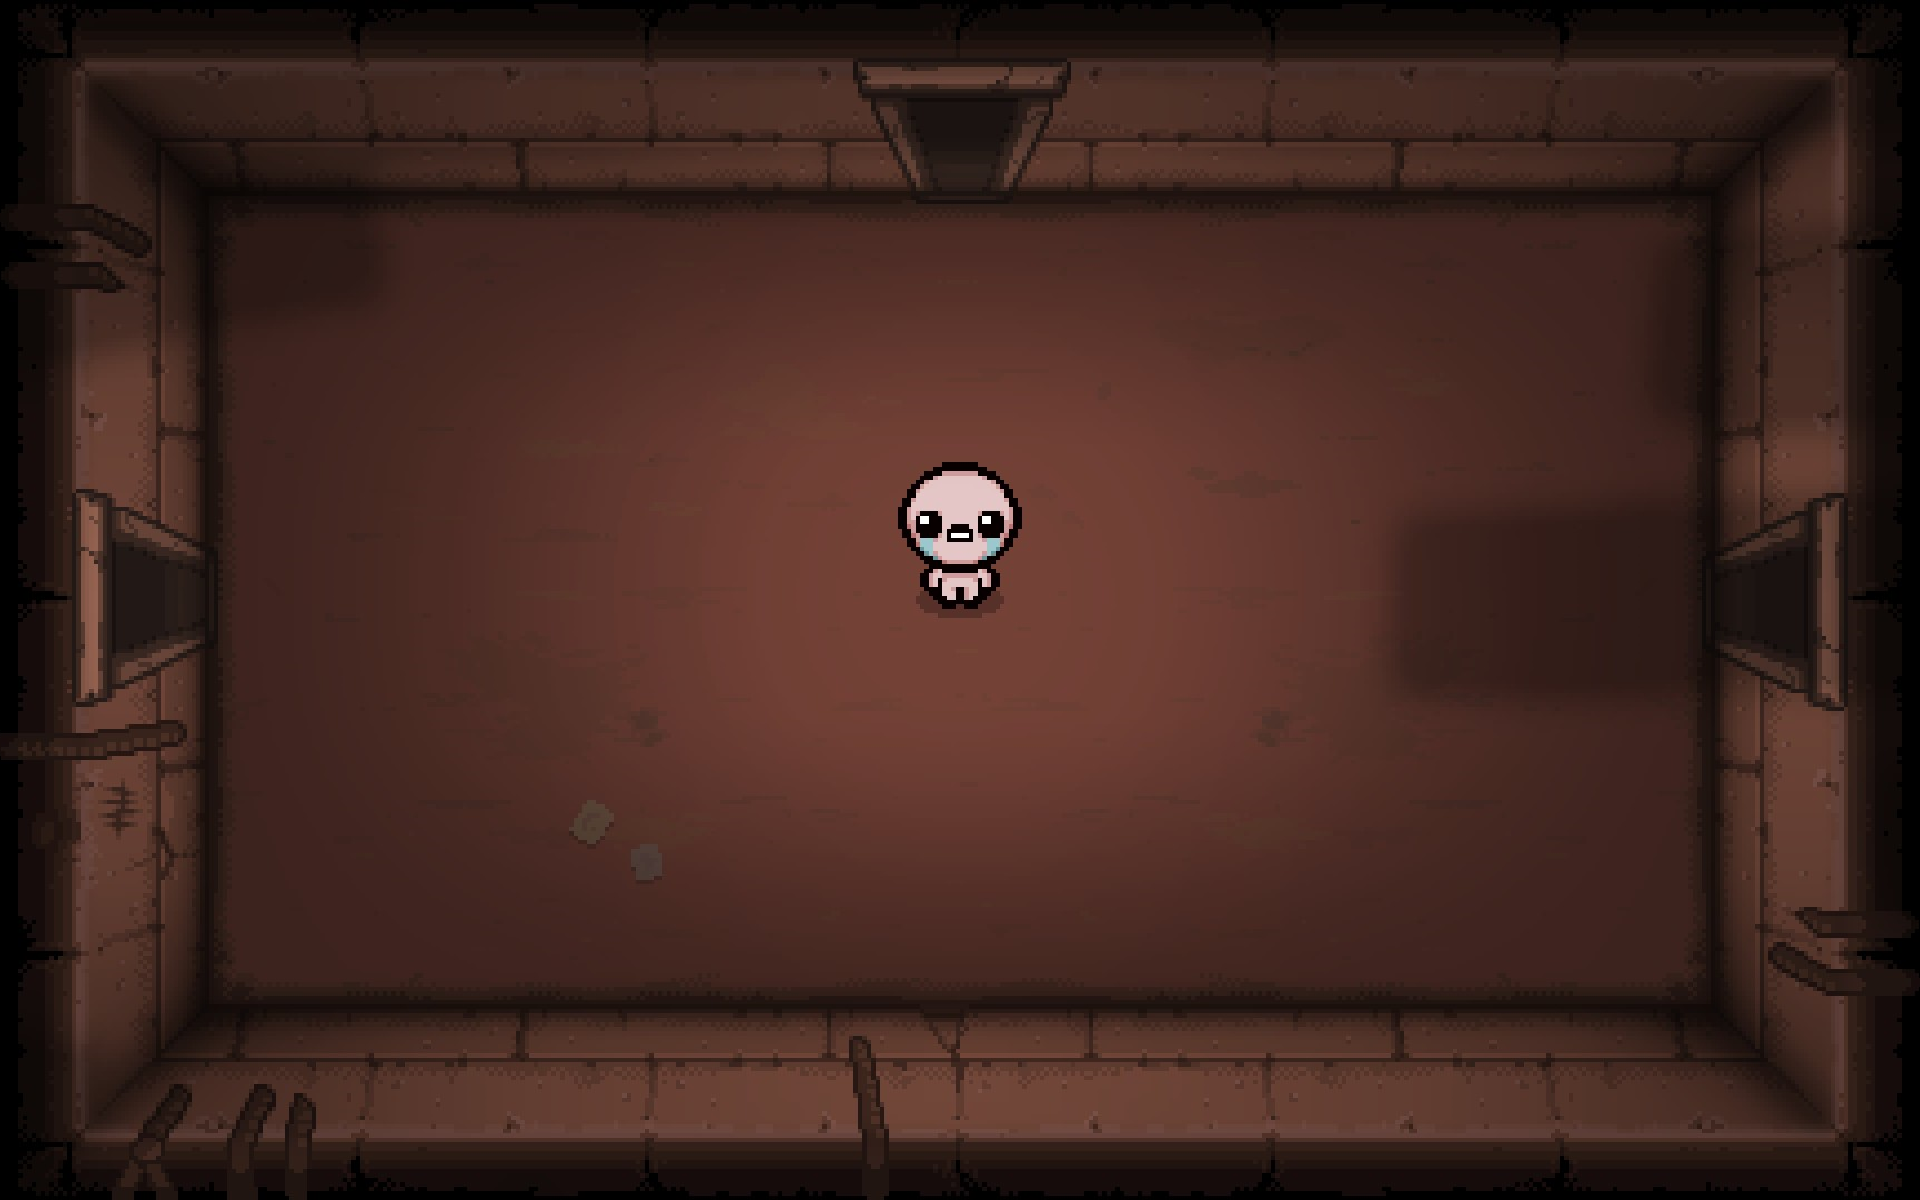 binding of isaac rebirth rune console commands